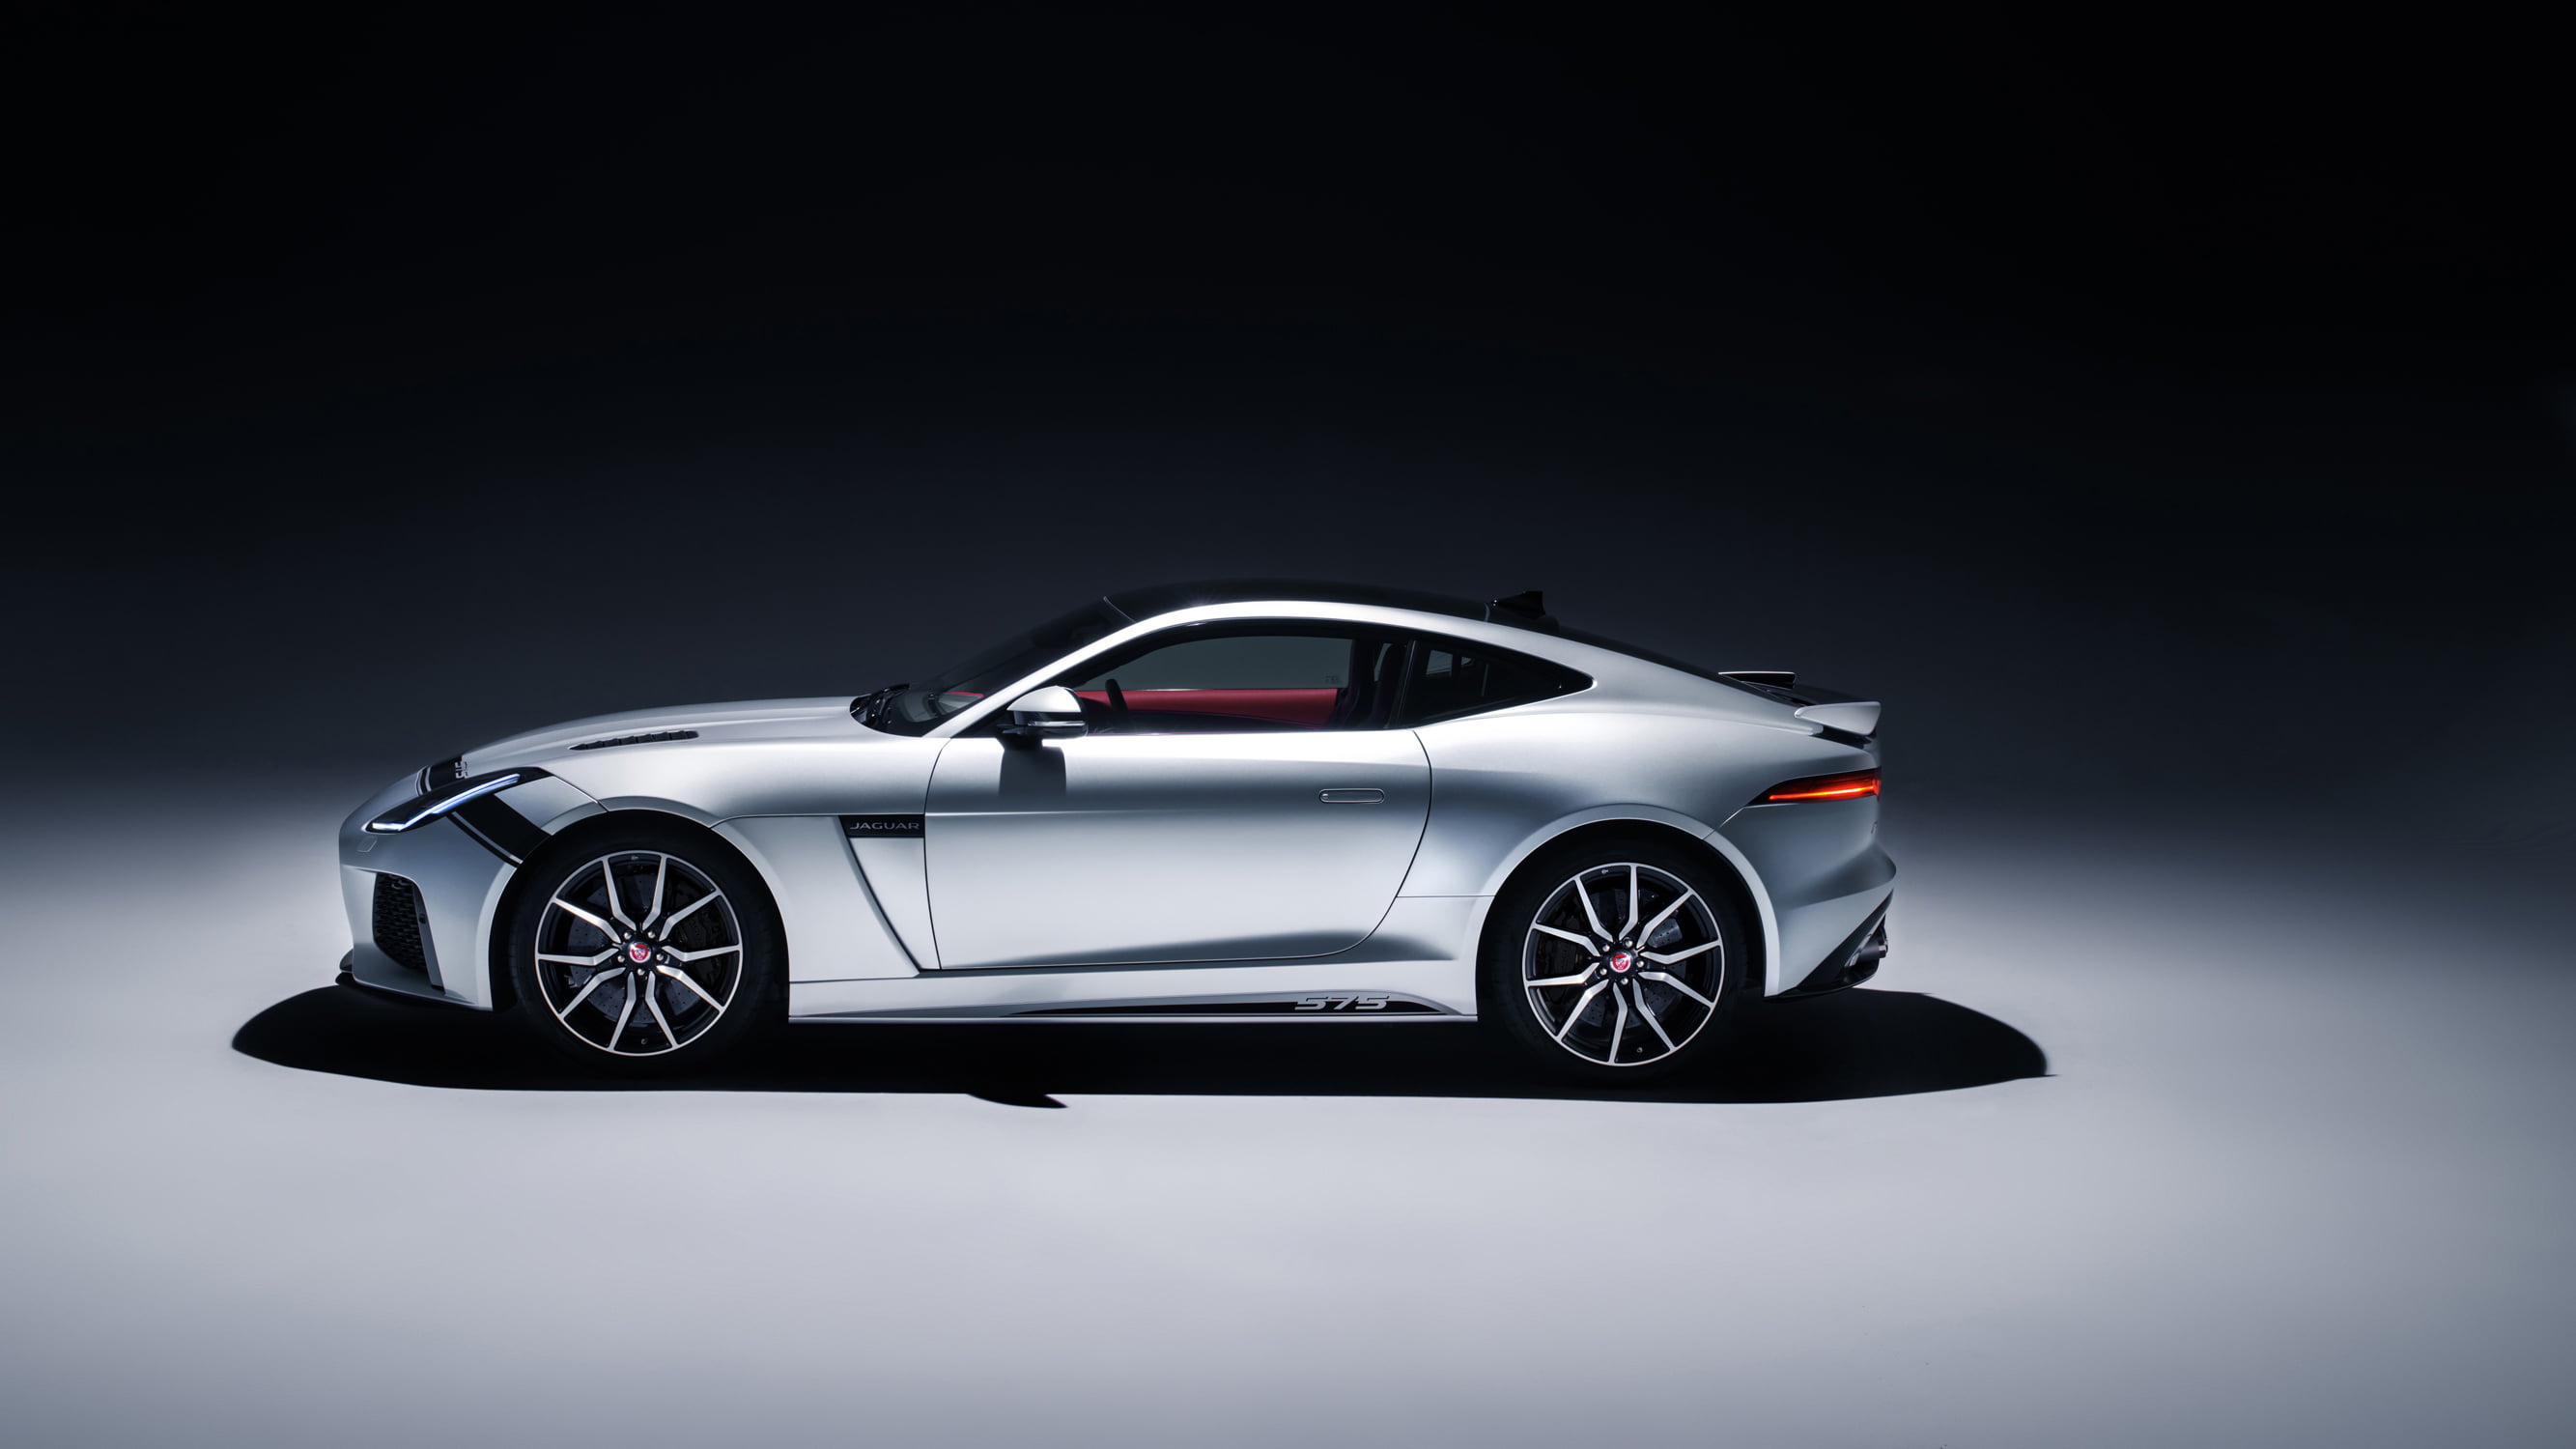 3840x2160 resolution | silver sports coupe, Jaguar F-Type SVR, Graphic ...